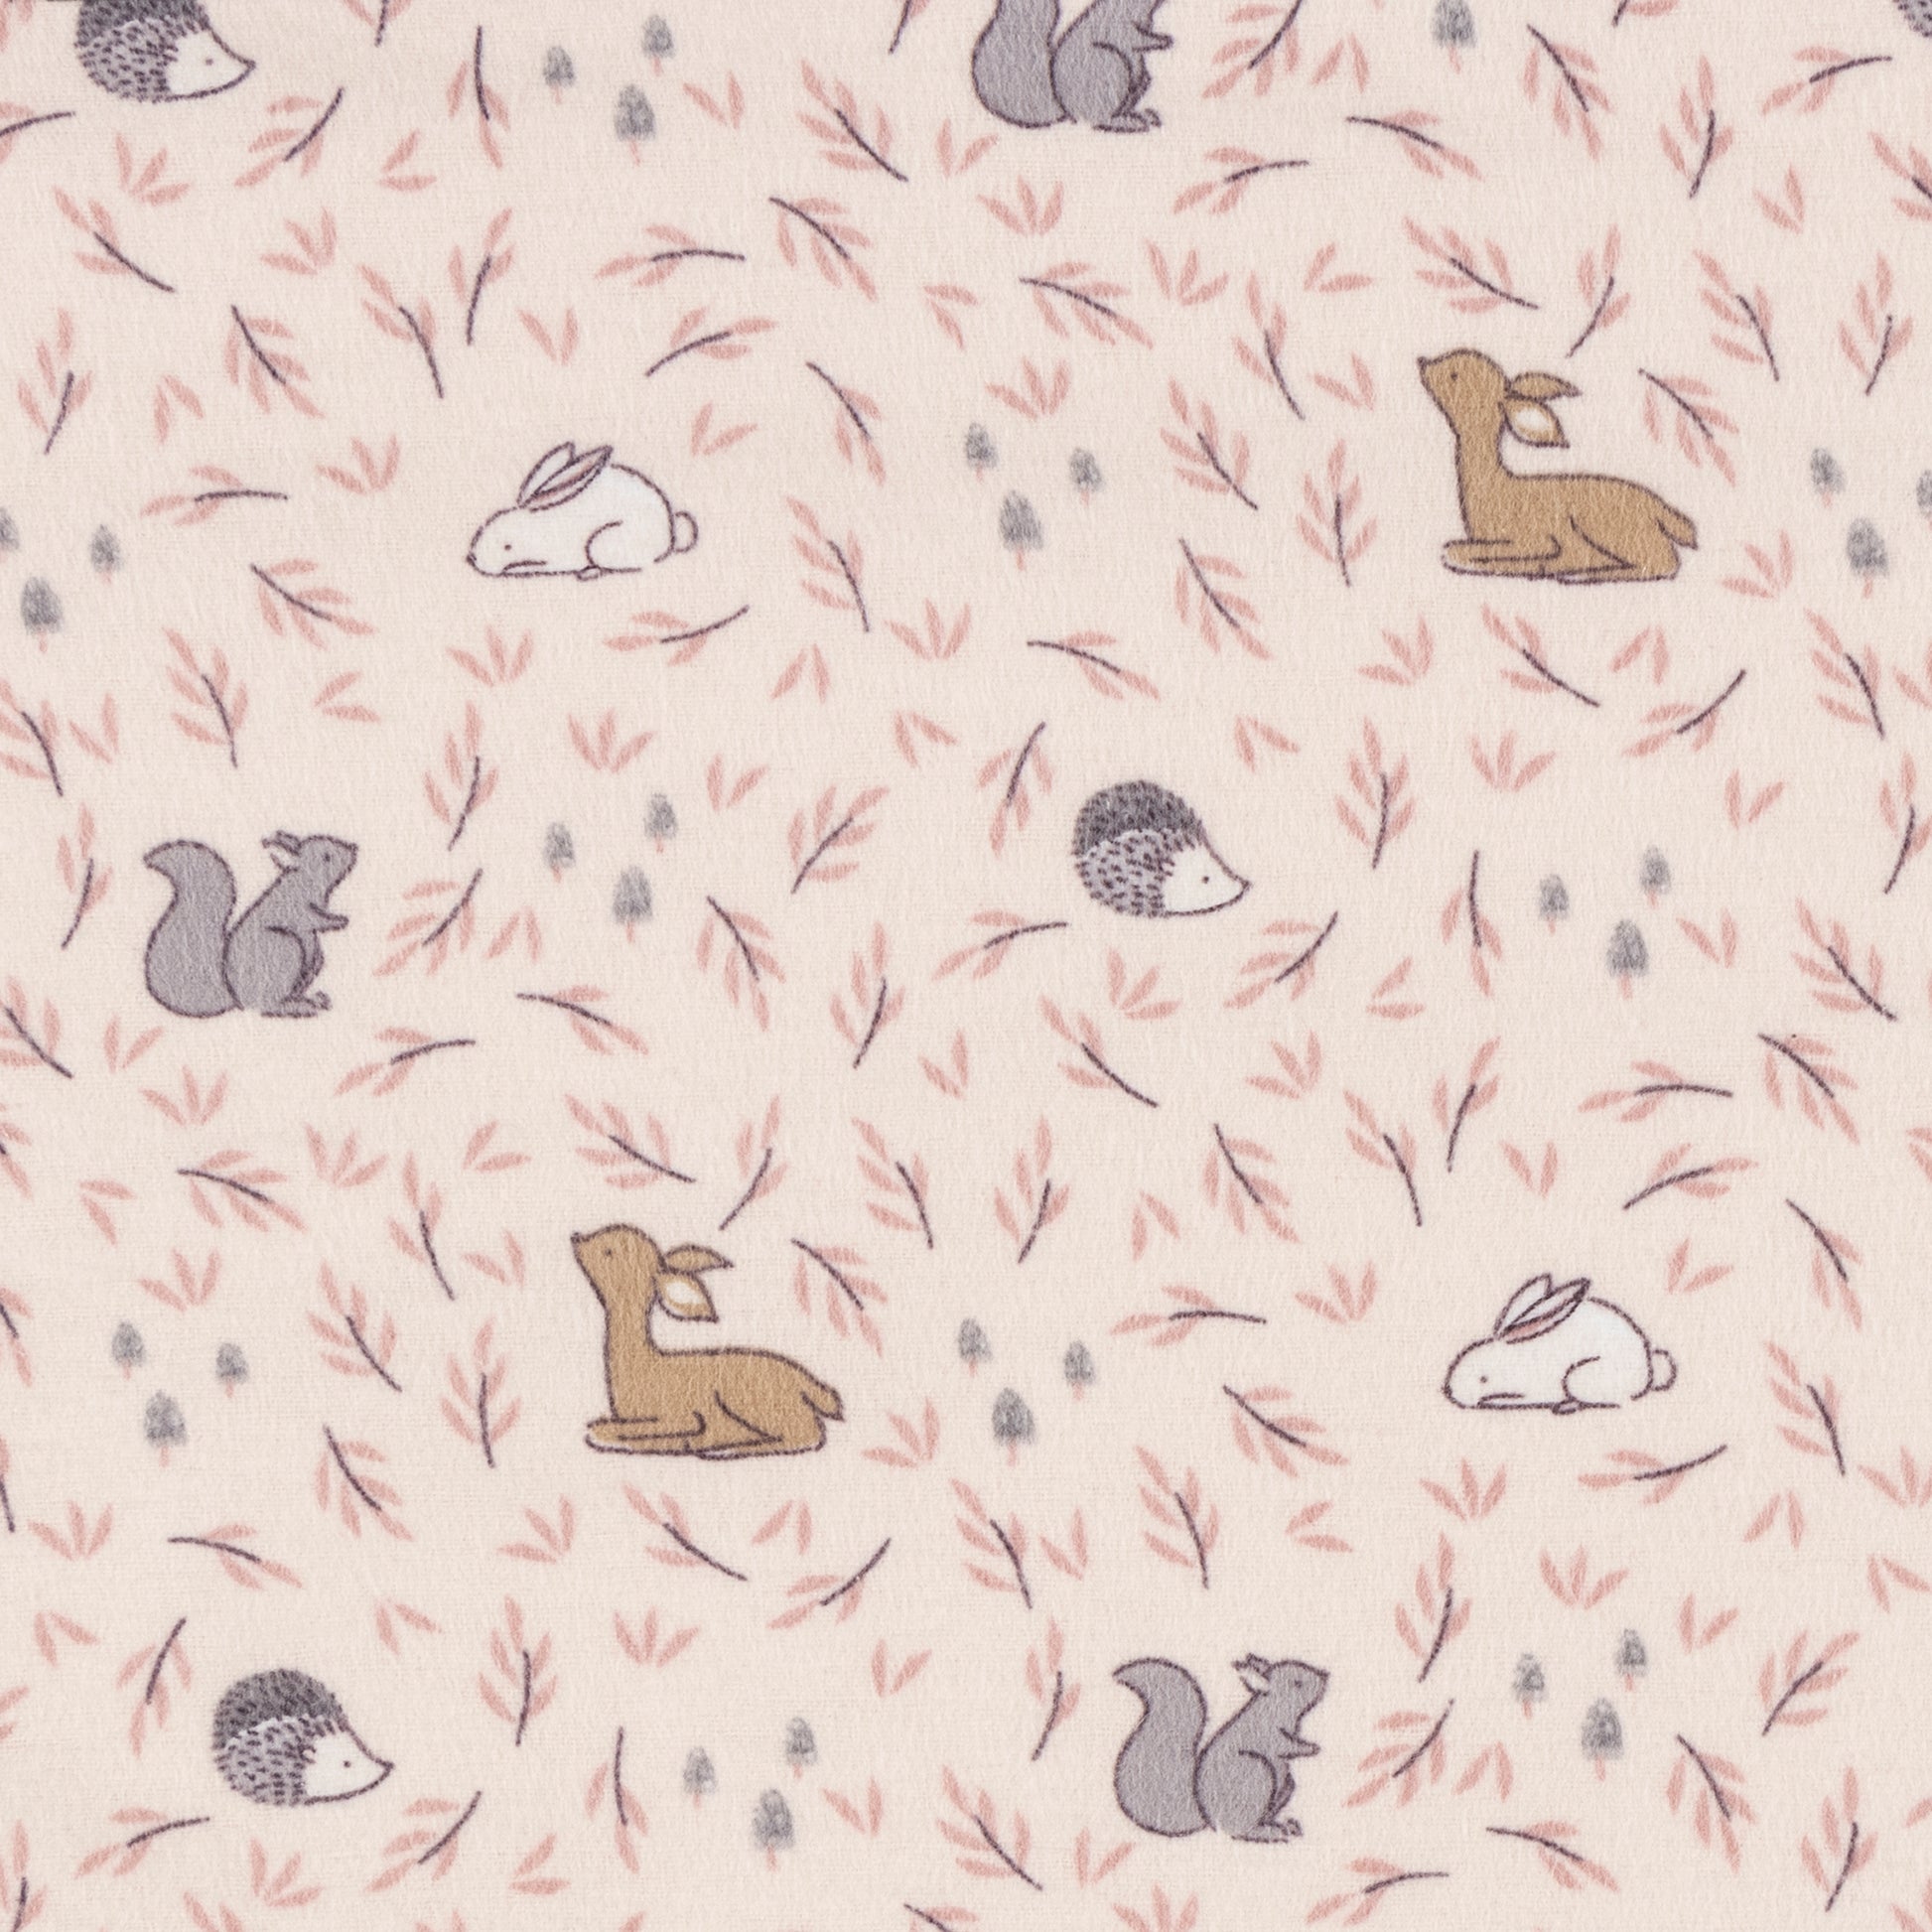 Autumn Forest Deluxe Flannel Fitted Crib Sheet- swatch view up close crib sheet features he white bunny, gray squirrel, purple hedgehog, and light taupe deer frolic on a lilac background with eggplant purple leaves and mushroom scene